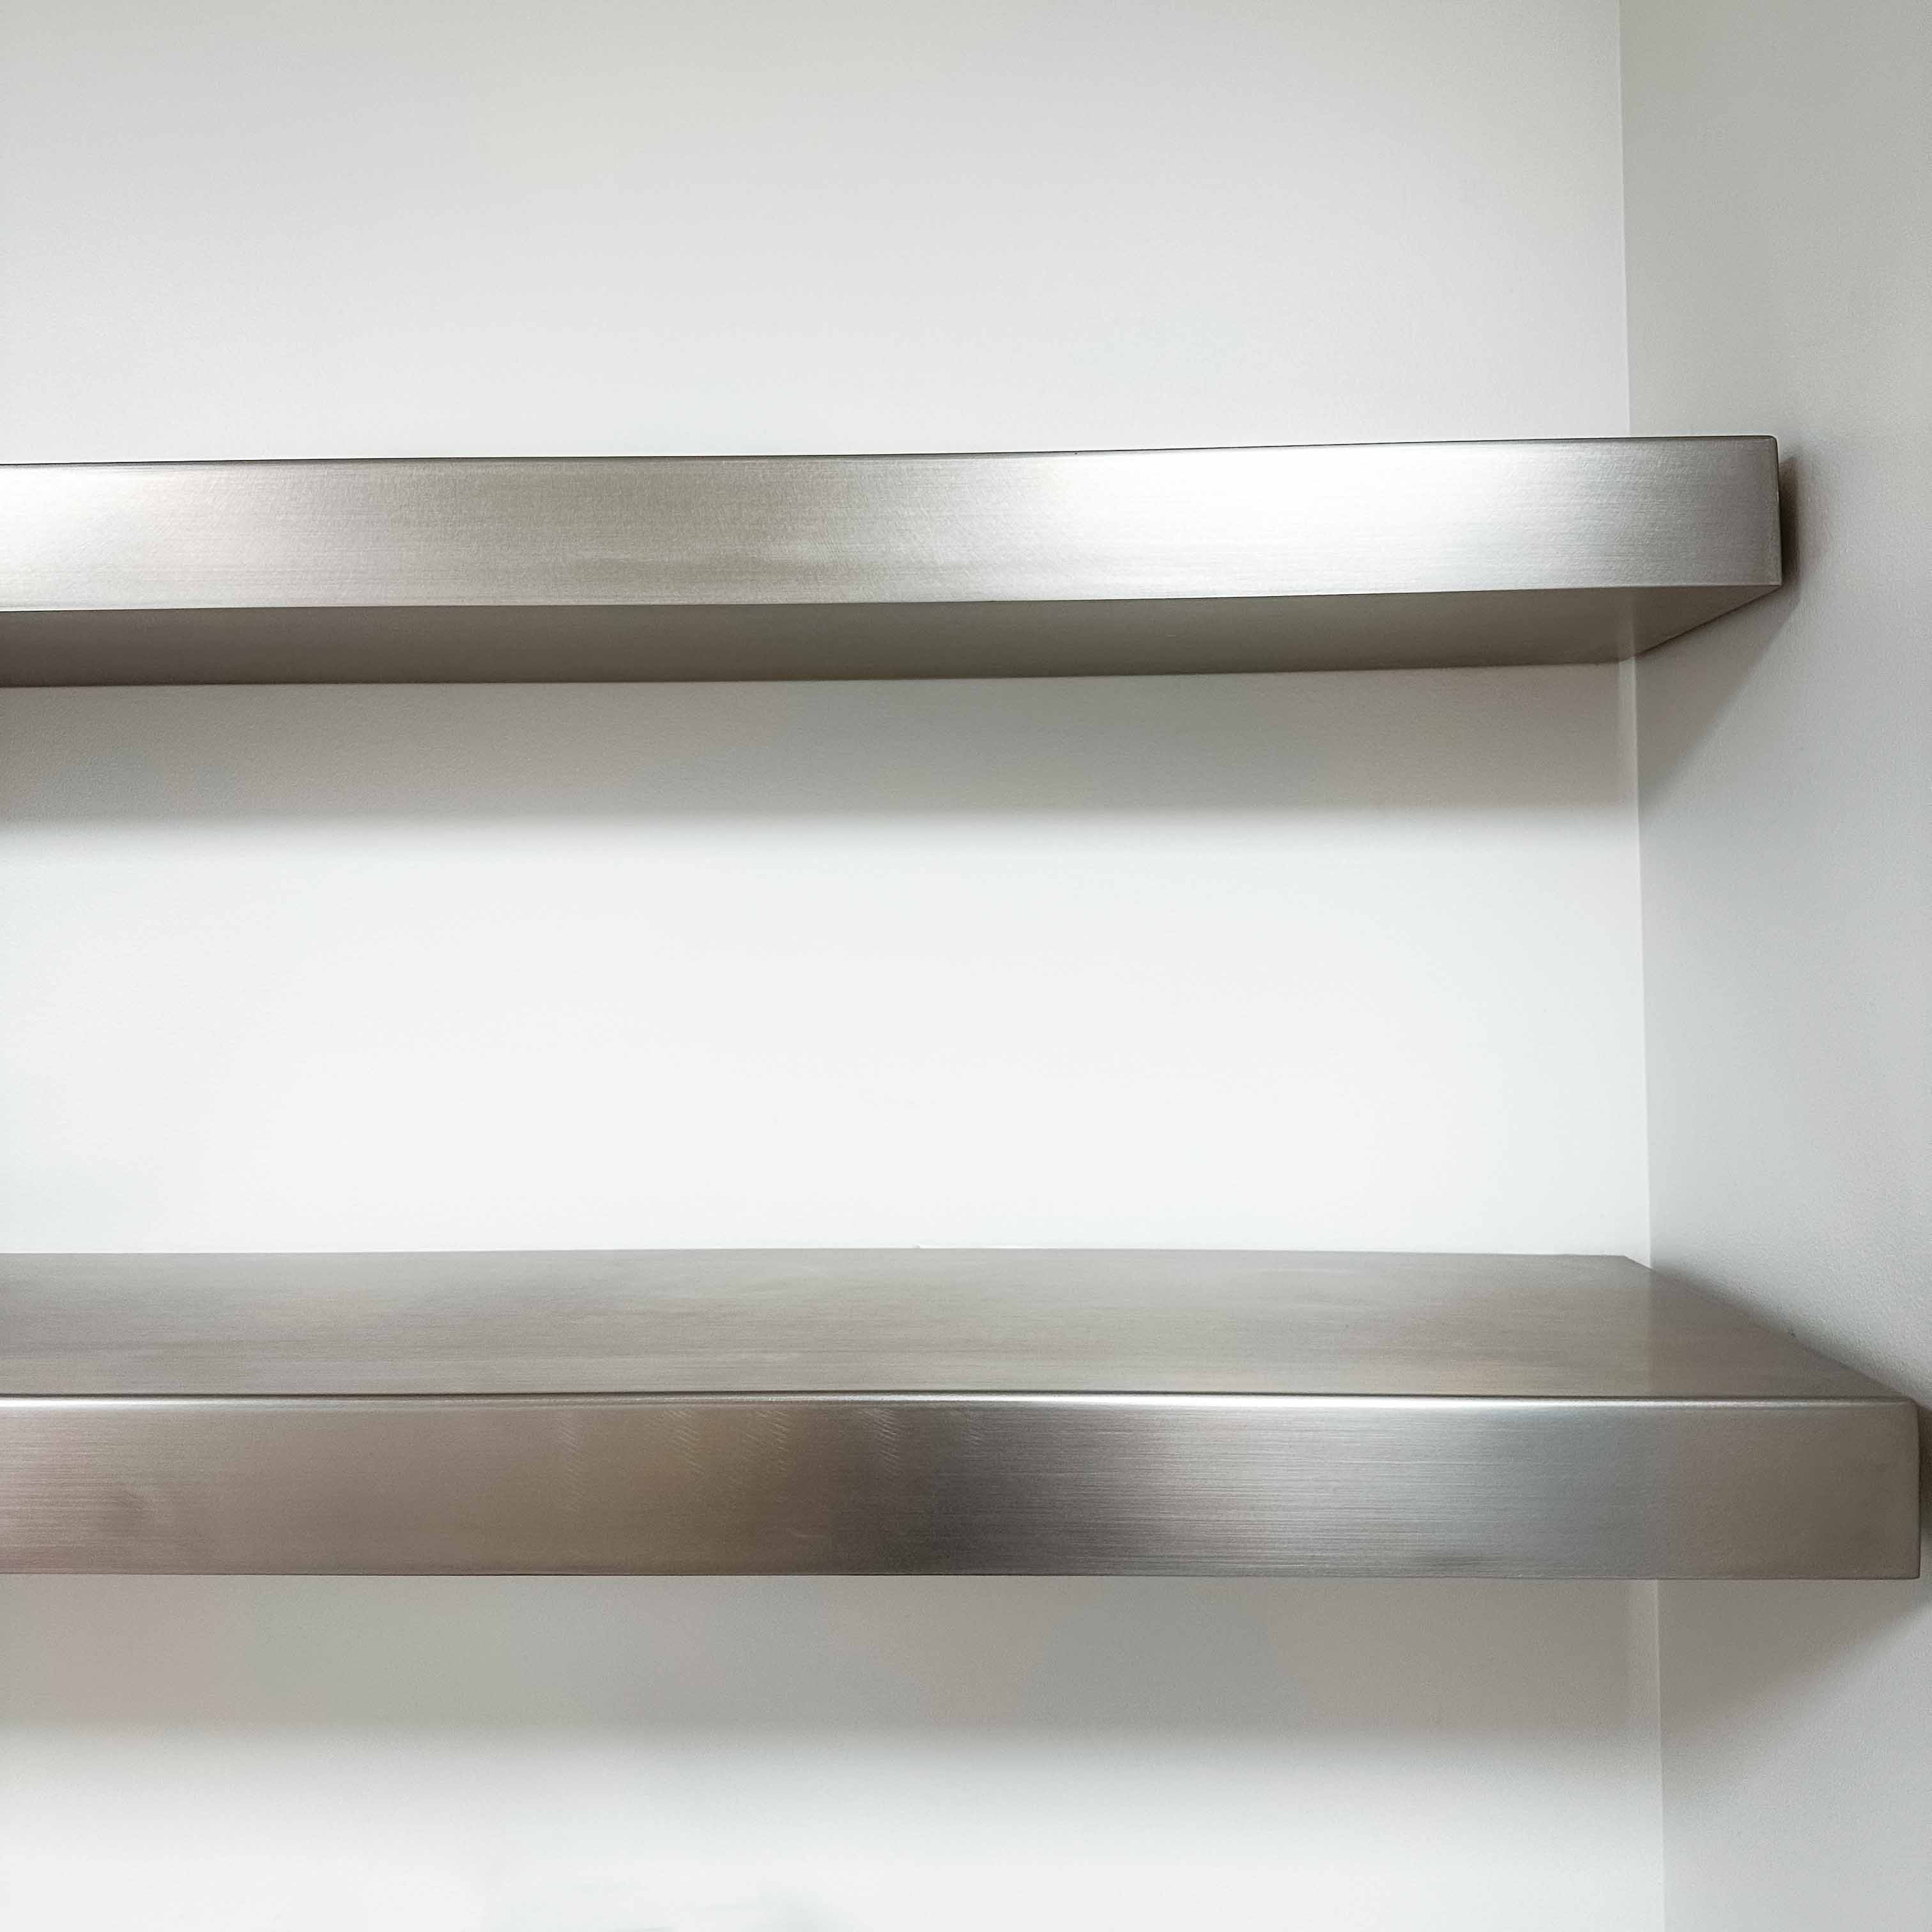 Stainless Steel Floating Shelf 12 Deep for Kitchen, Bathroom and Home